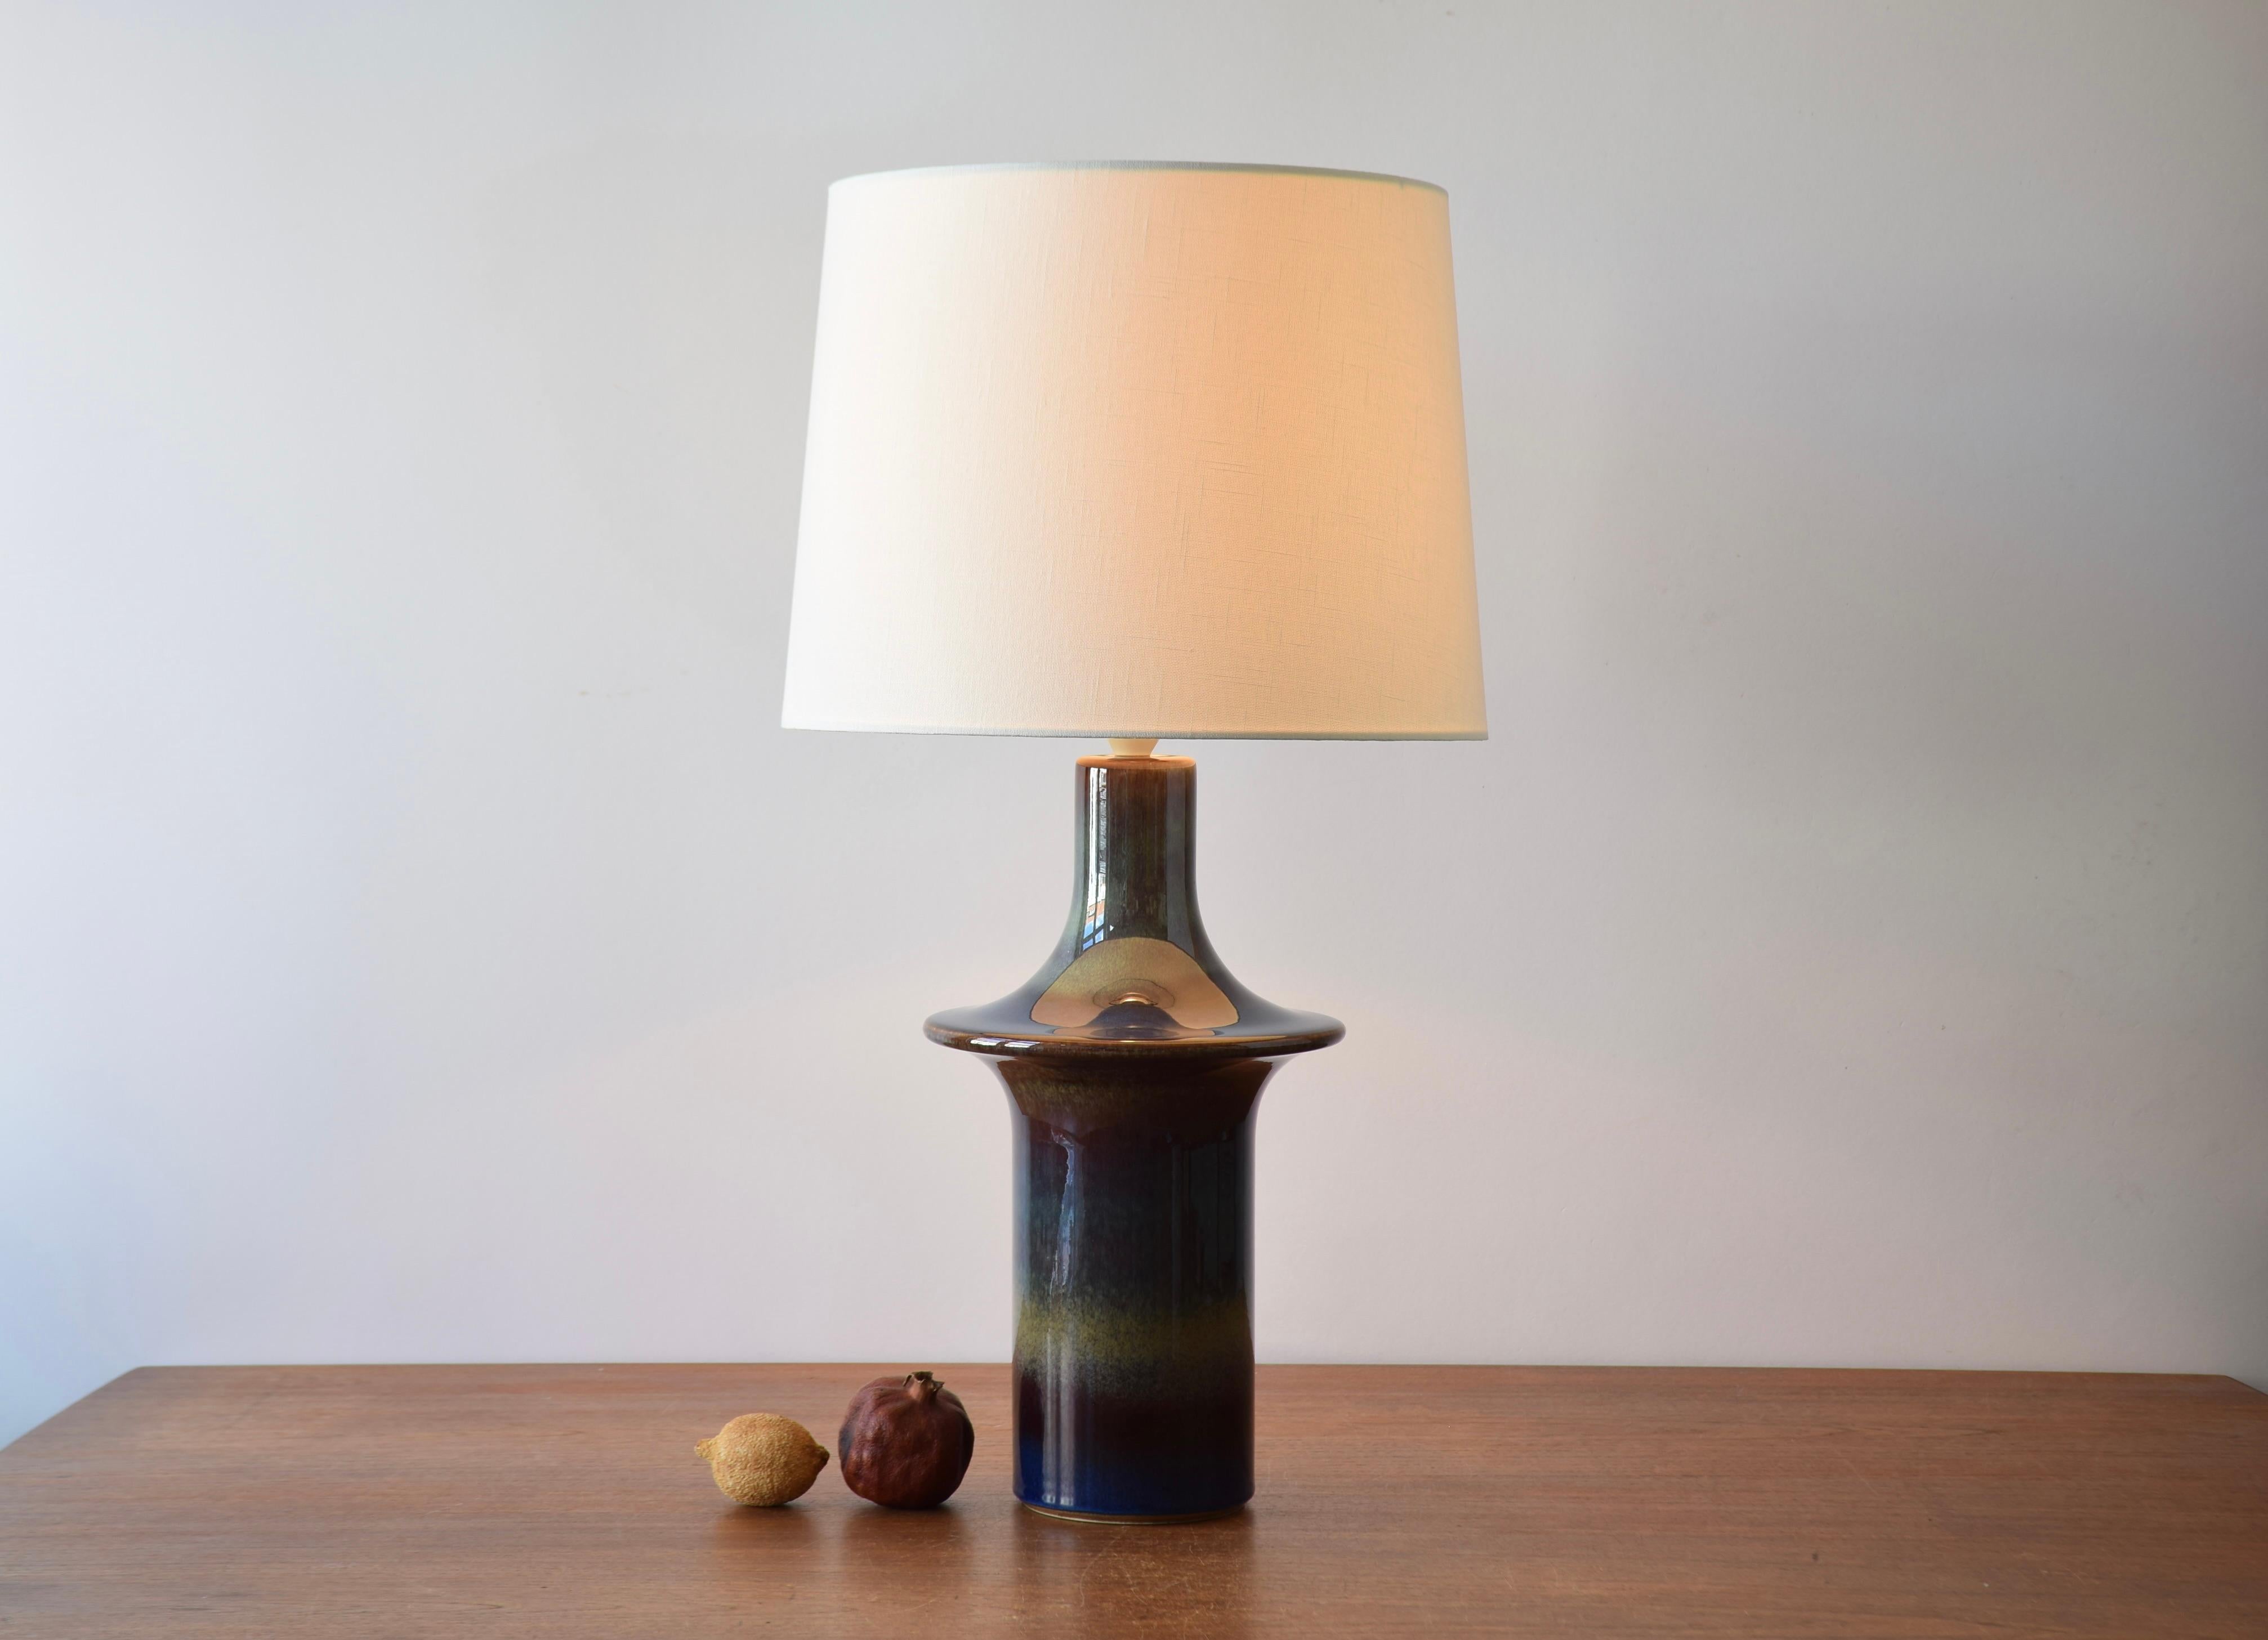 Danish Modern sculptural ufo shaped table lamp made by Søholm Stentøj The design is attributed to Einar Johansen. Made ca 1960s.

The lamp is decorated with glossy glaze with a beautiful color play in dark blue purple, yellow and brown and reminds